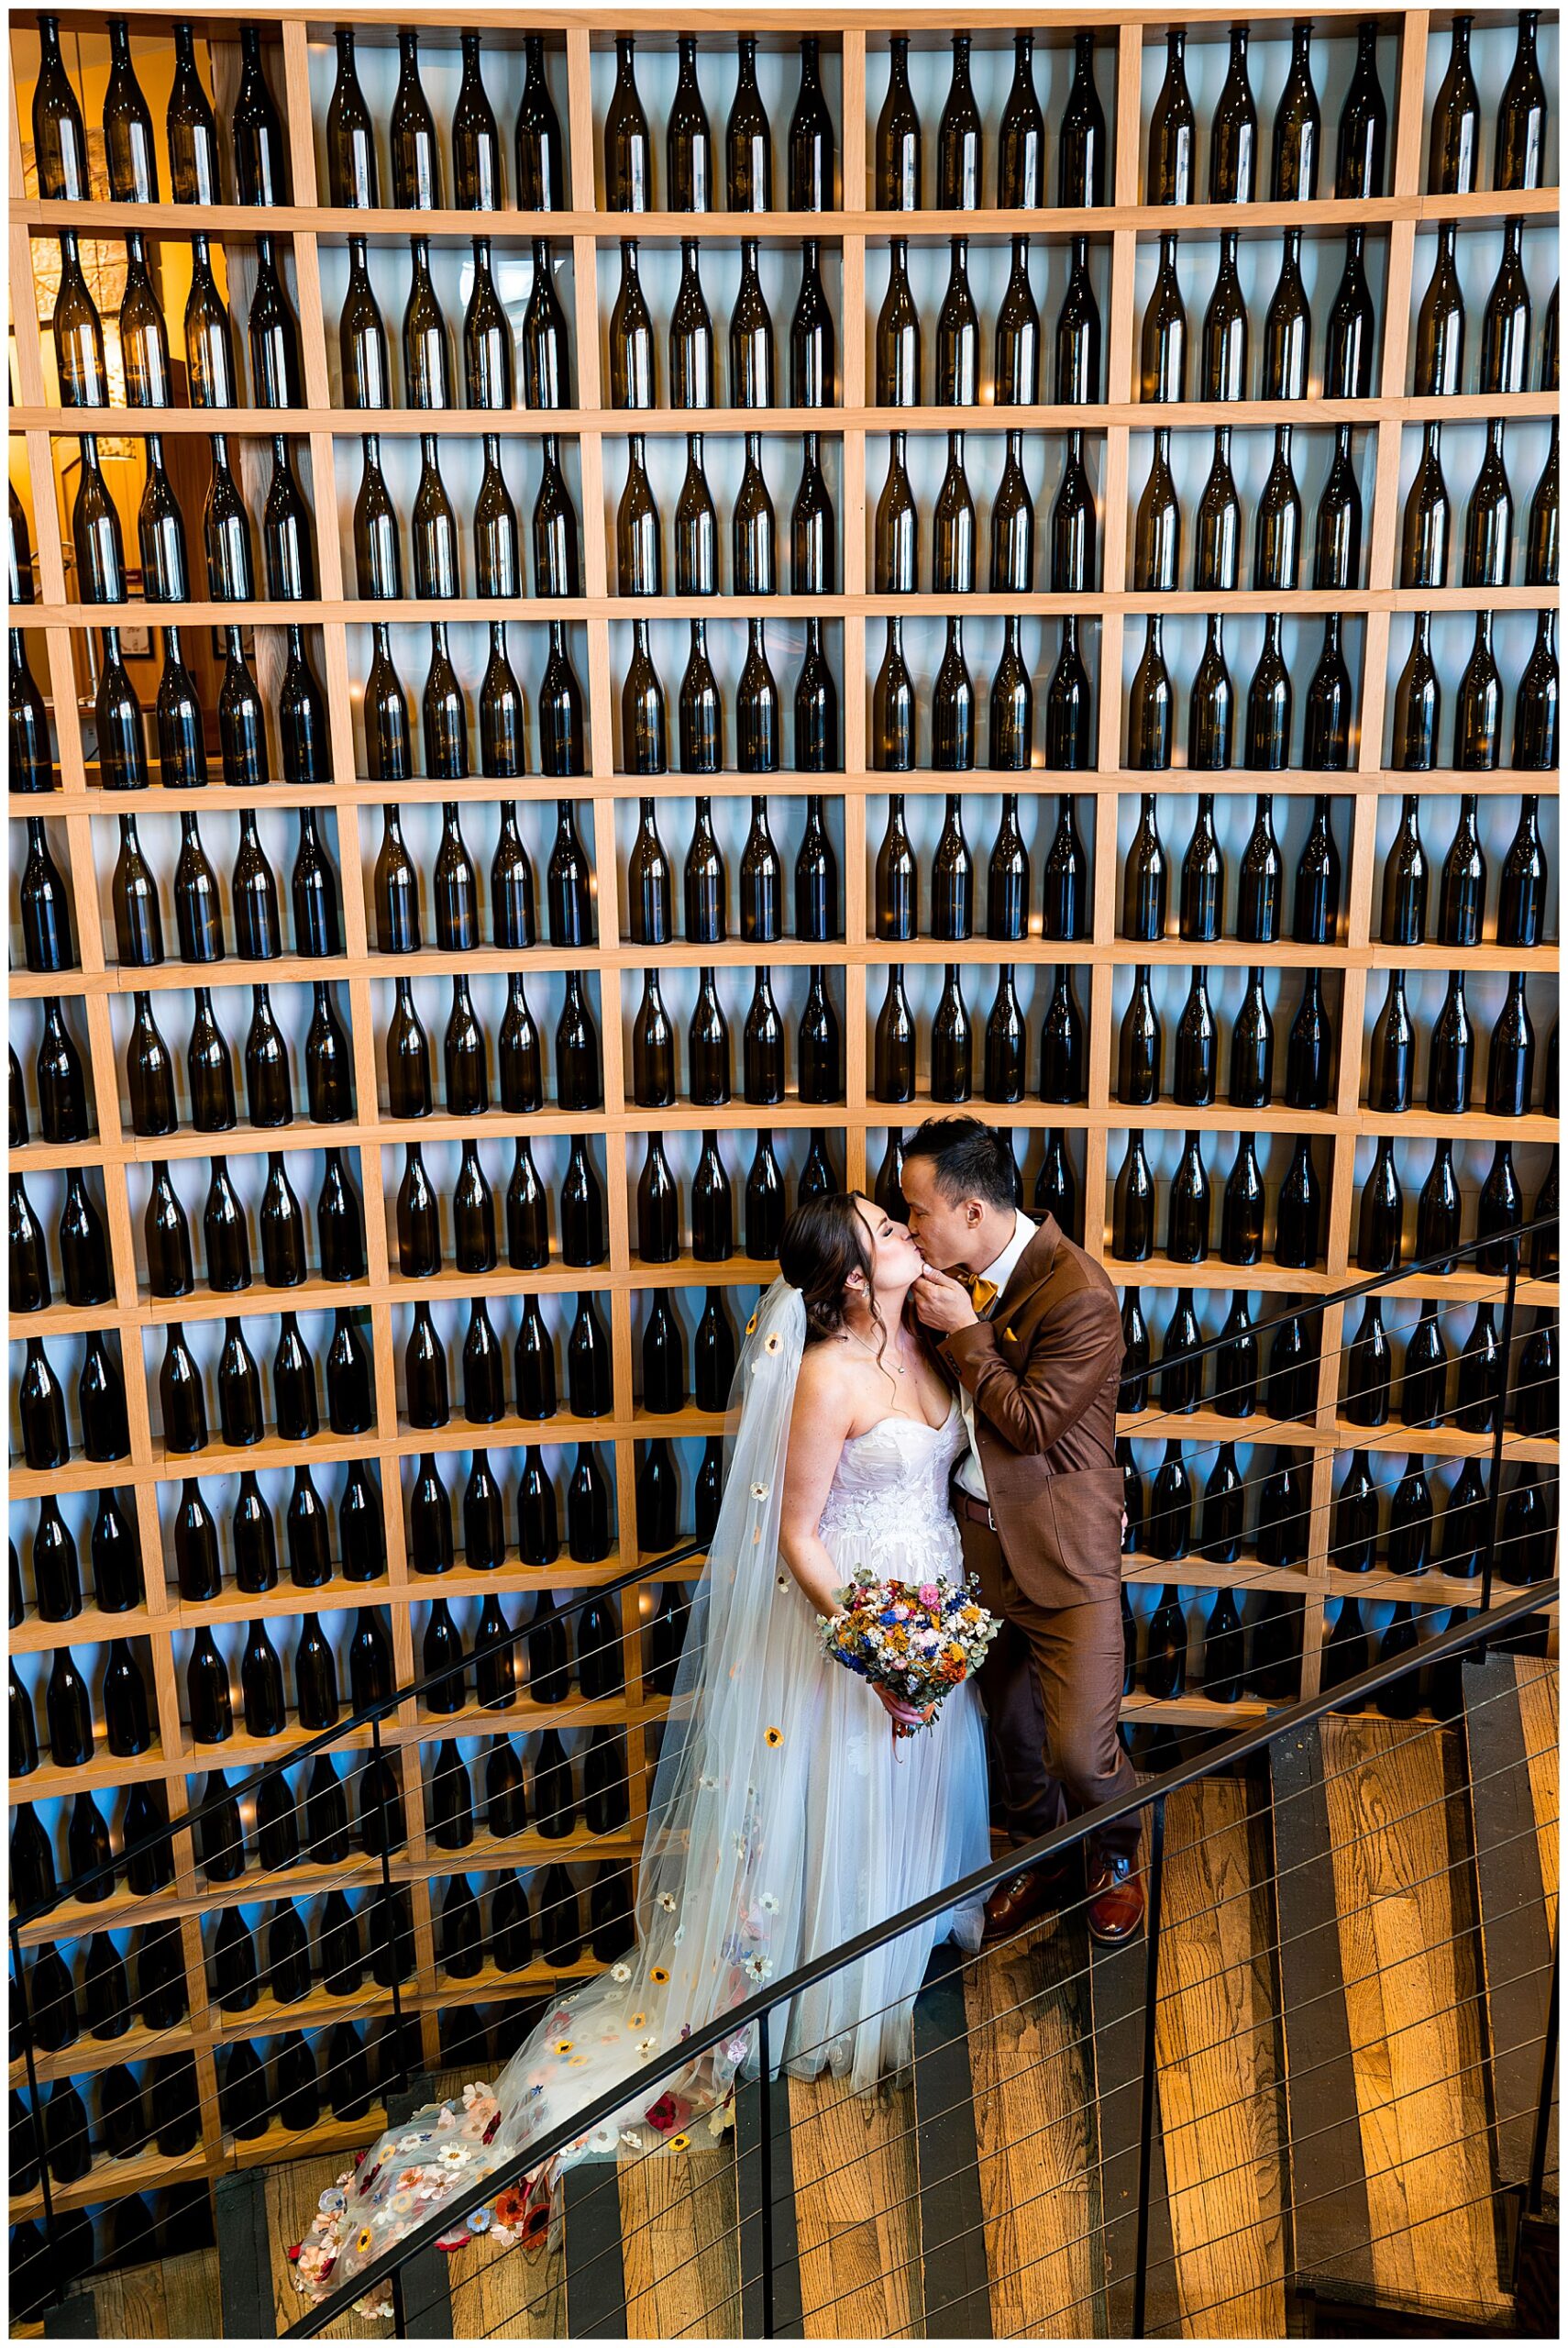 bride and groom kissing on the stairs in front of wall of wine bottles